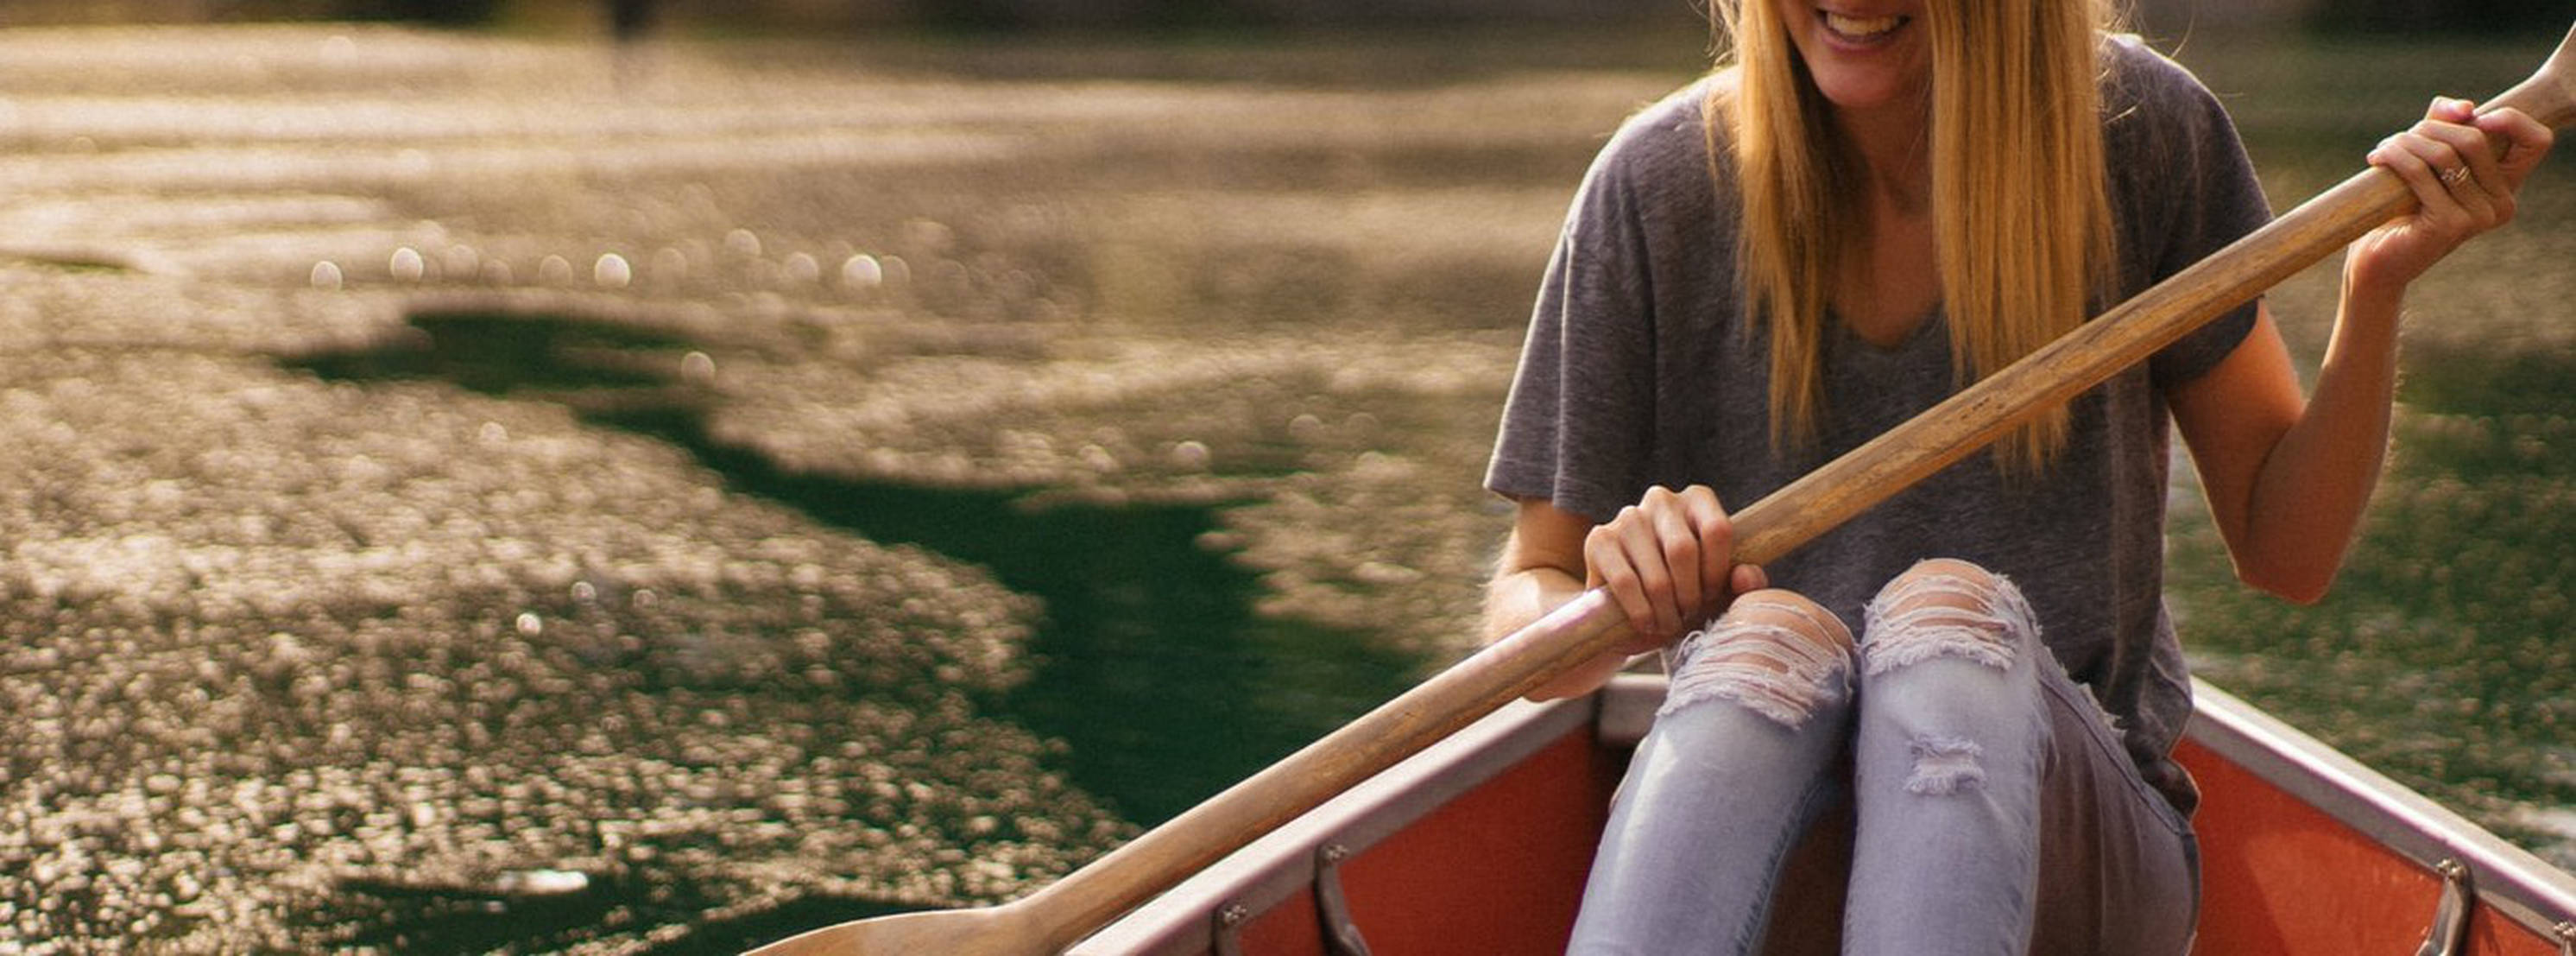 Incorrectly cropped image of girl in canoe, part of face cropped off [original by jordanbauer]